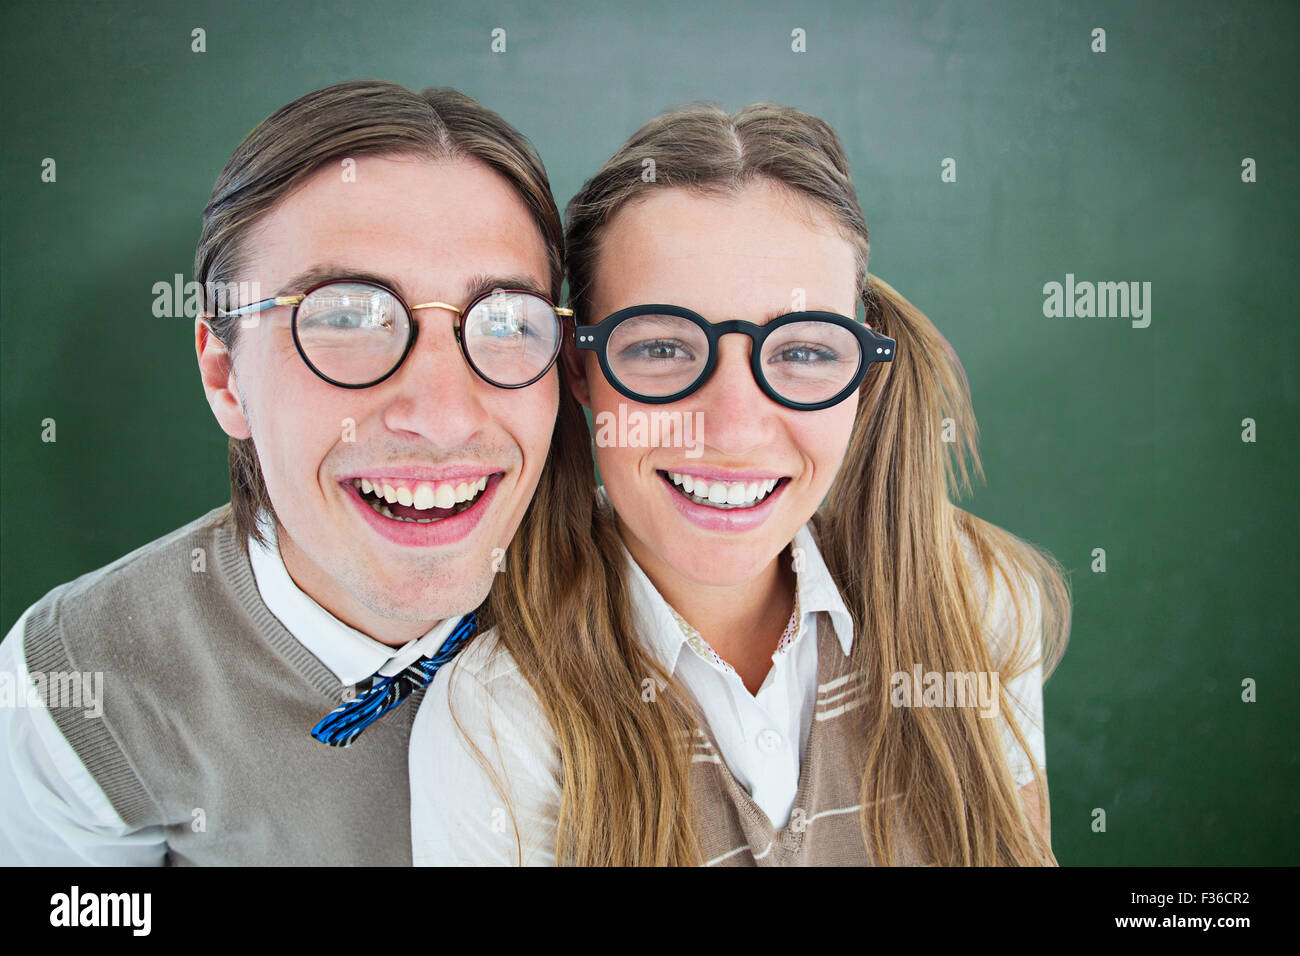 Composite image of geeky hipsters smiling at camera Stock Photo